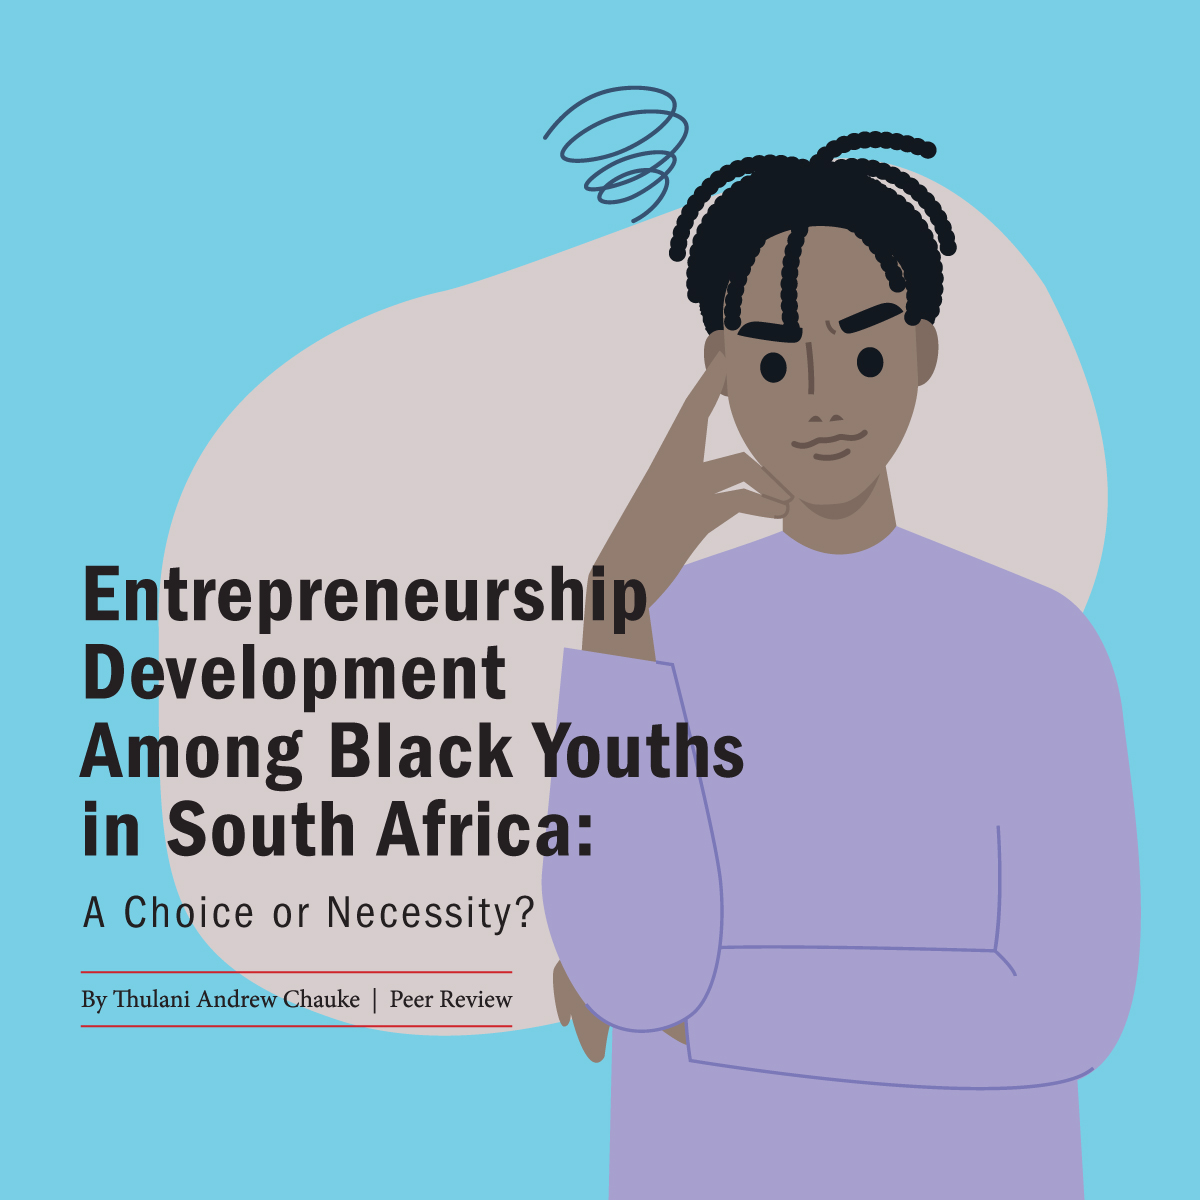 Entrepreneurship Development Among Black Youths in South Africa:  A Choice or Neccesity?